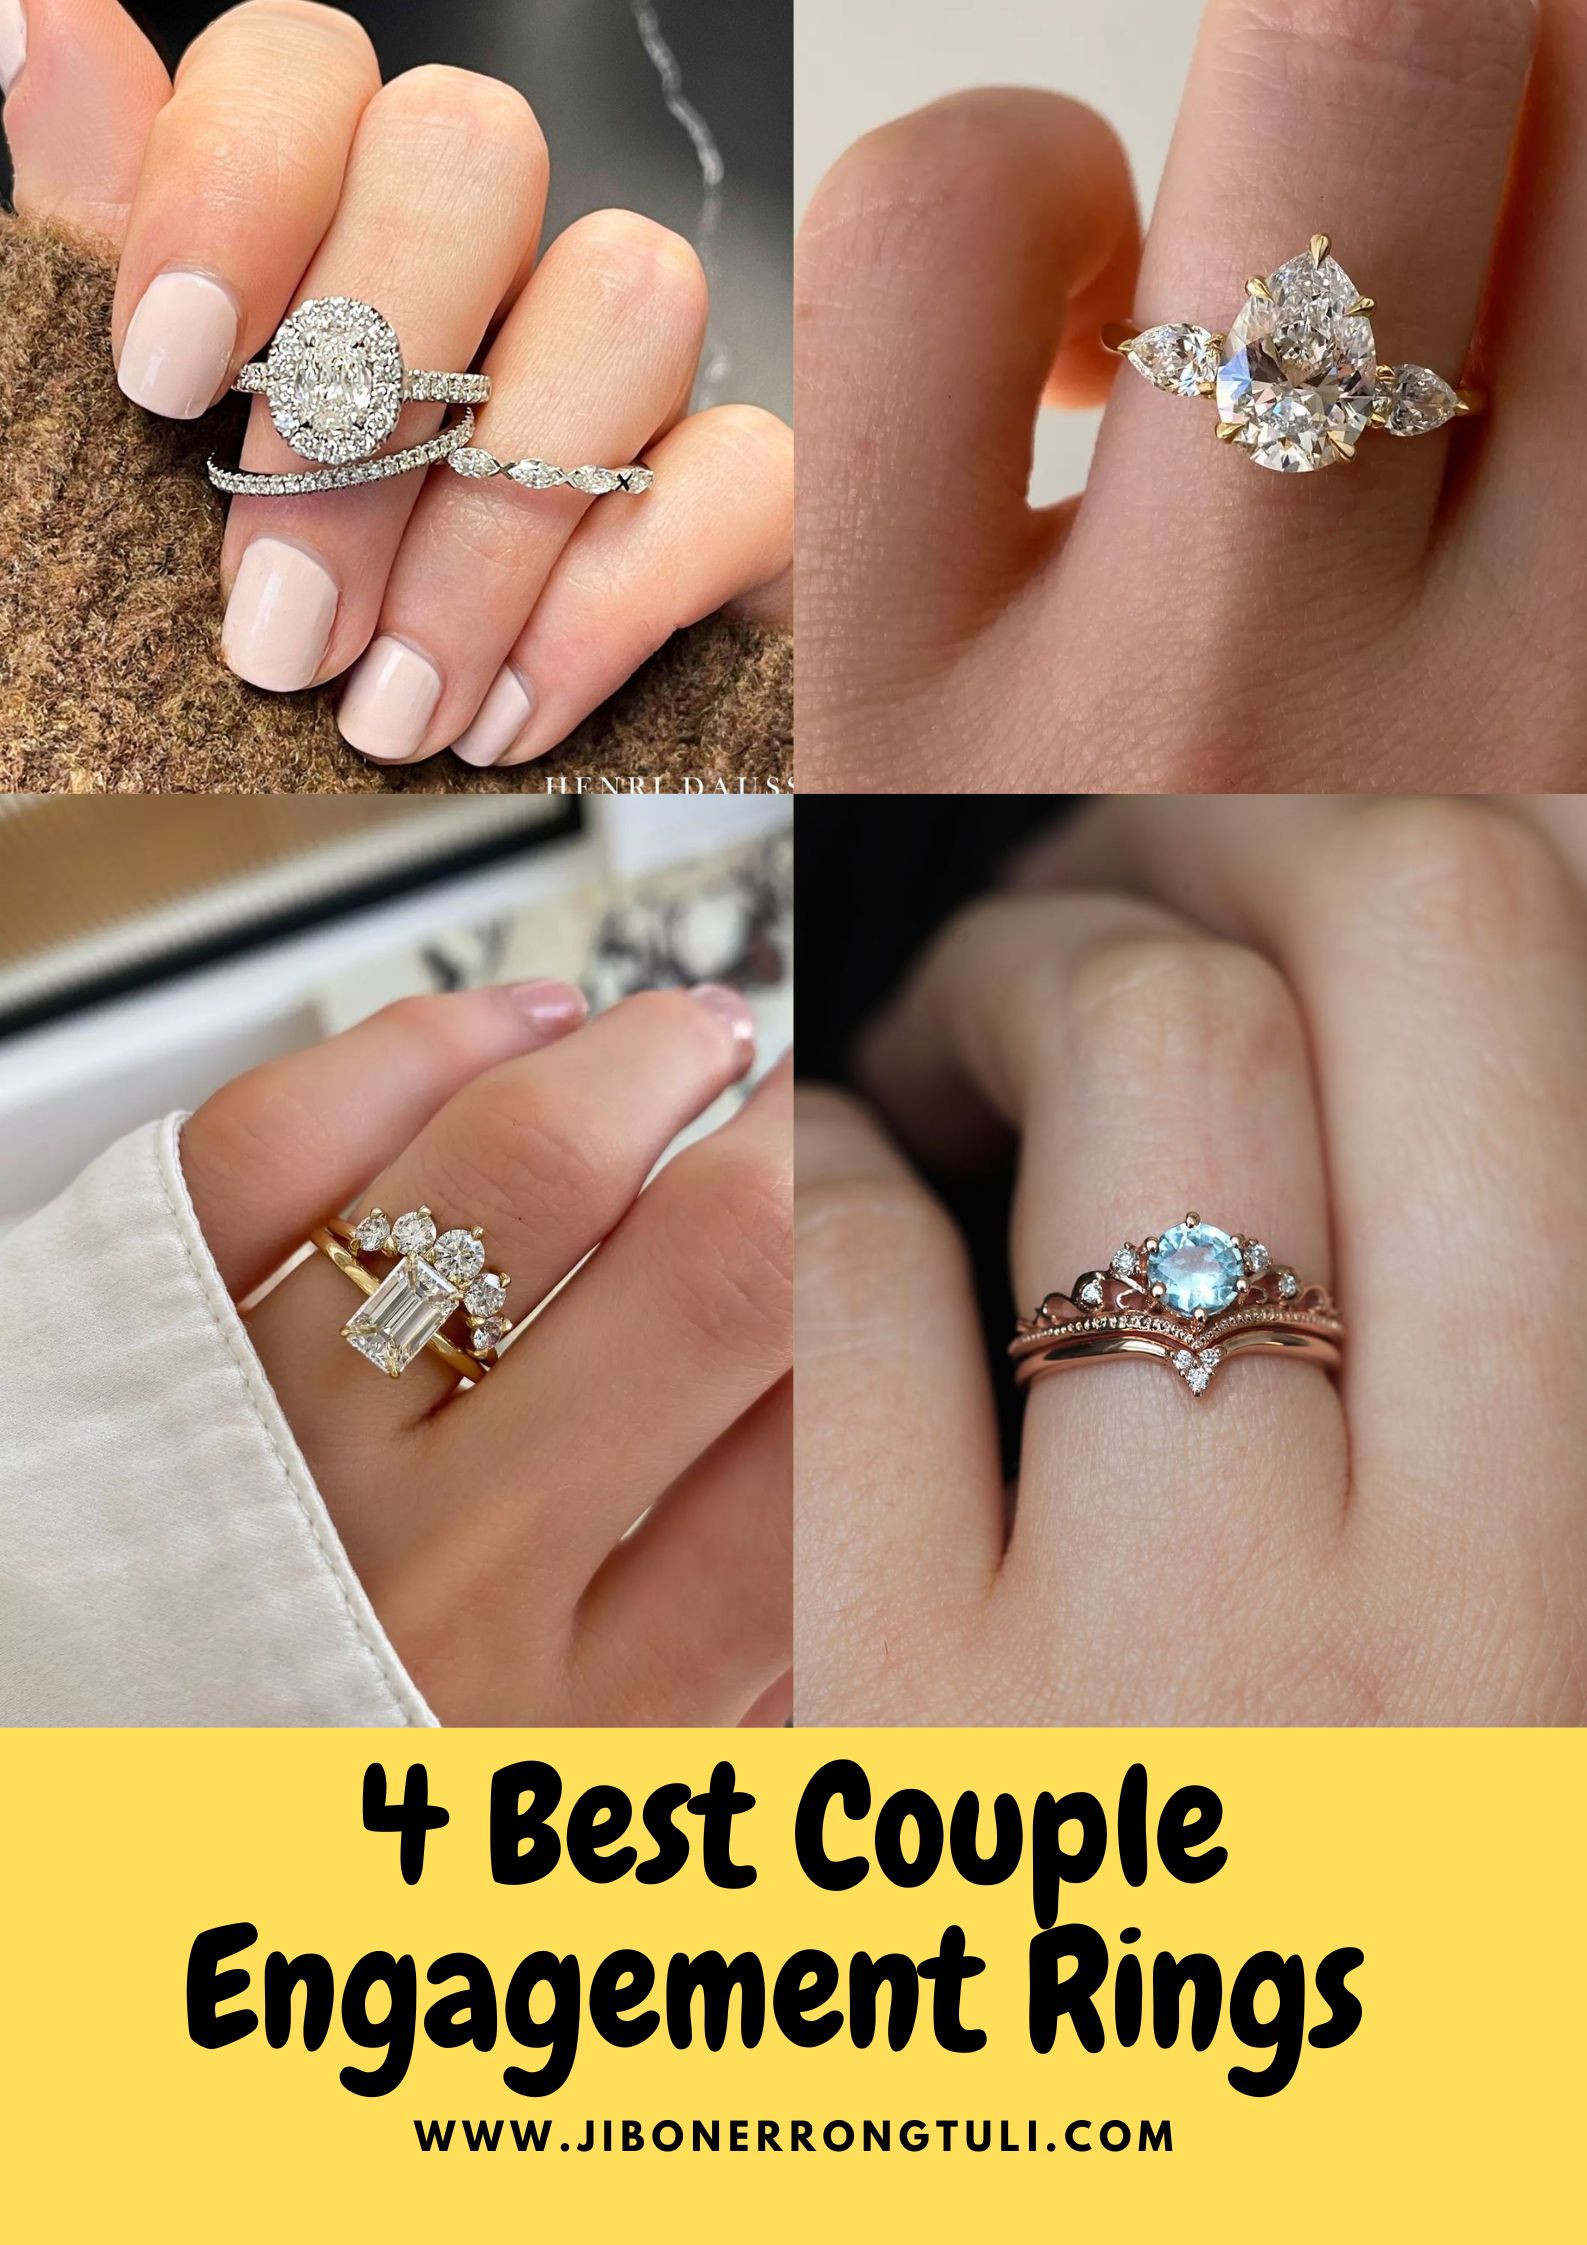 4 Best Couple Engagement Rings 